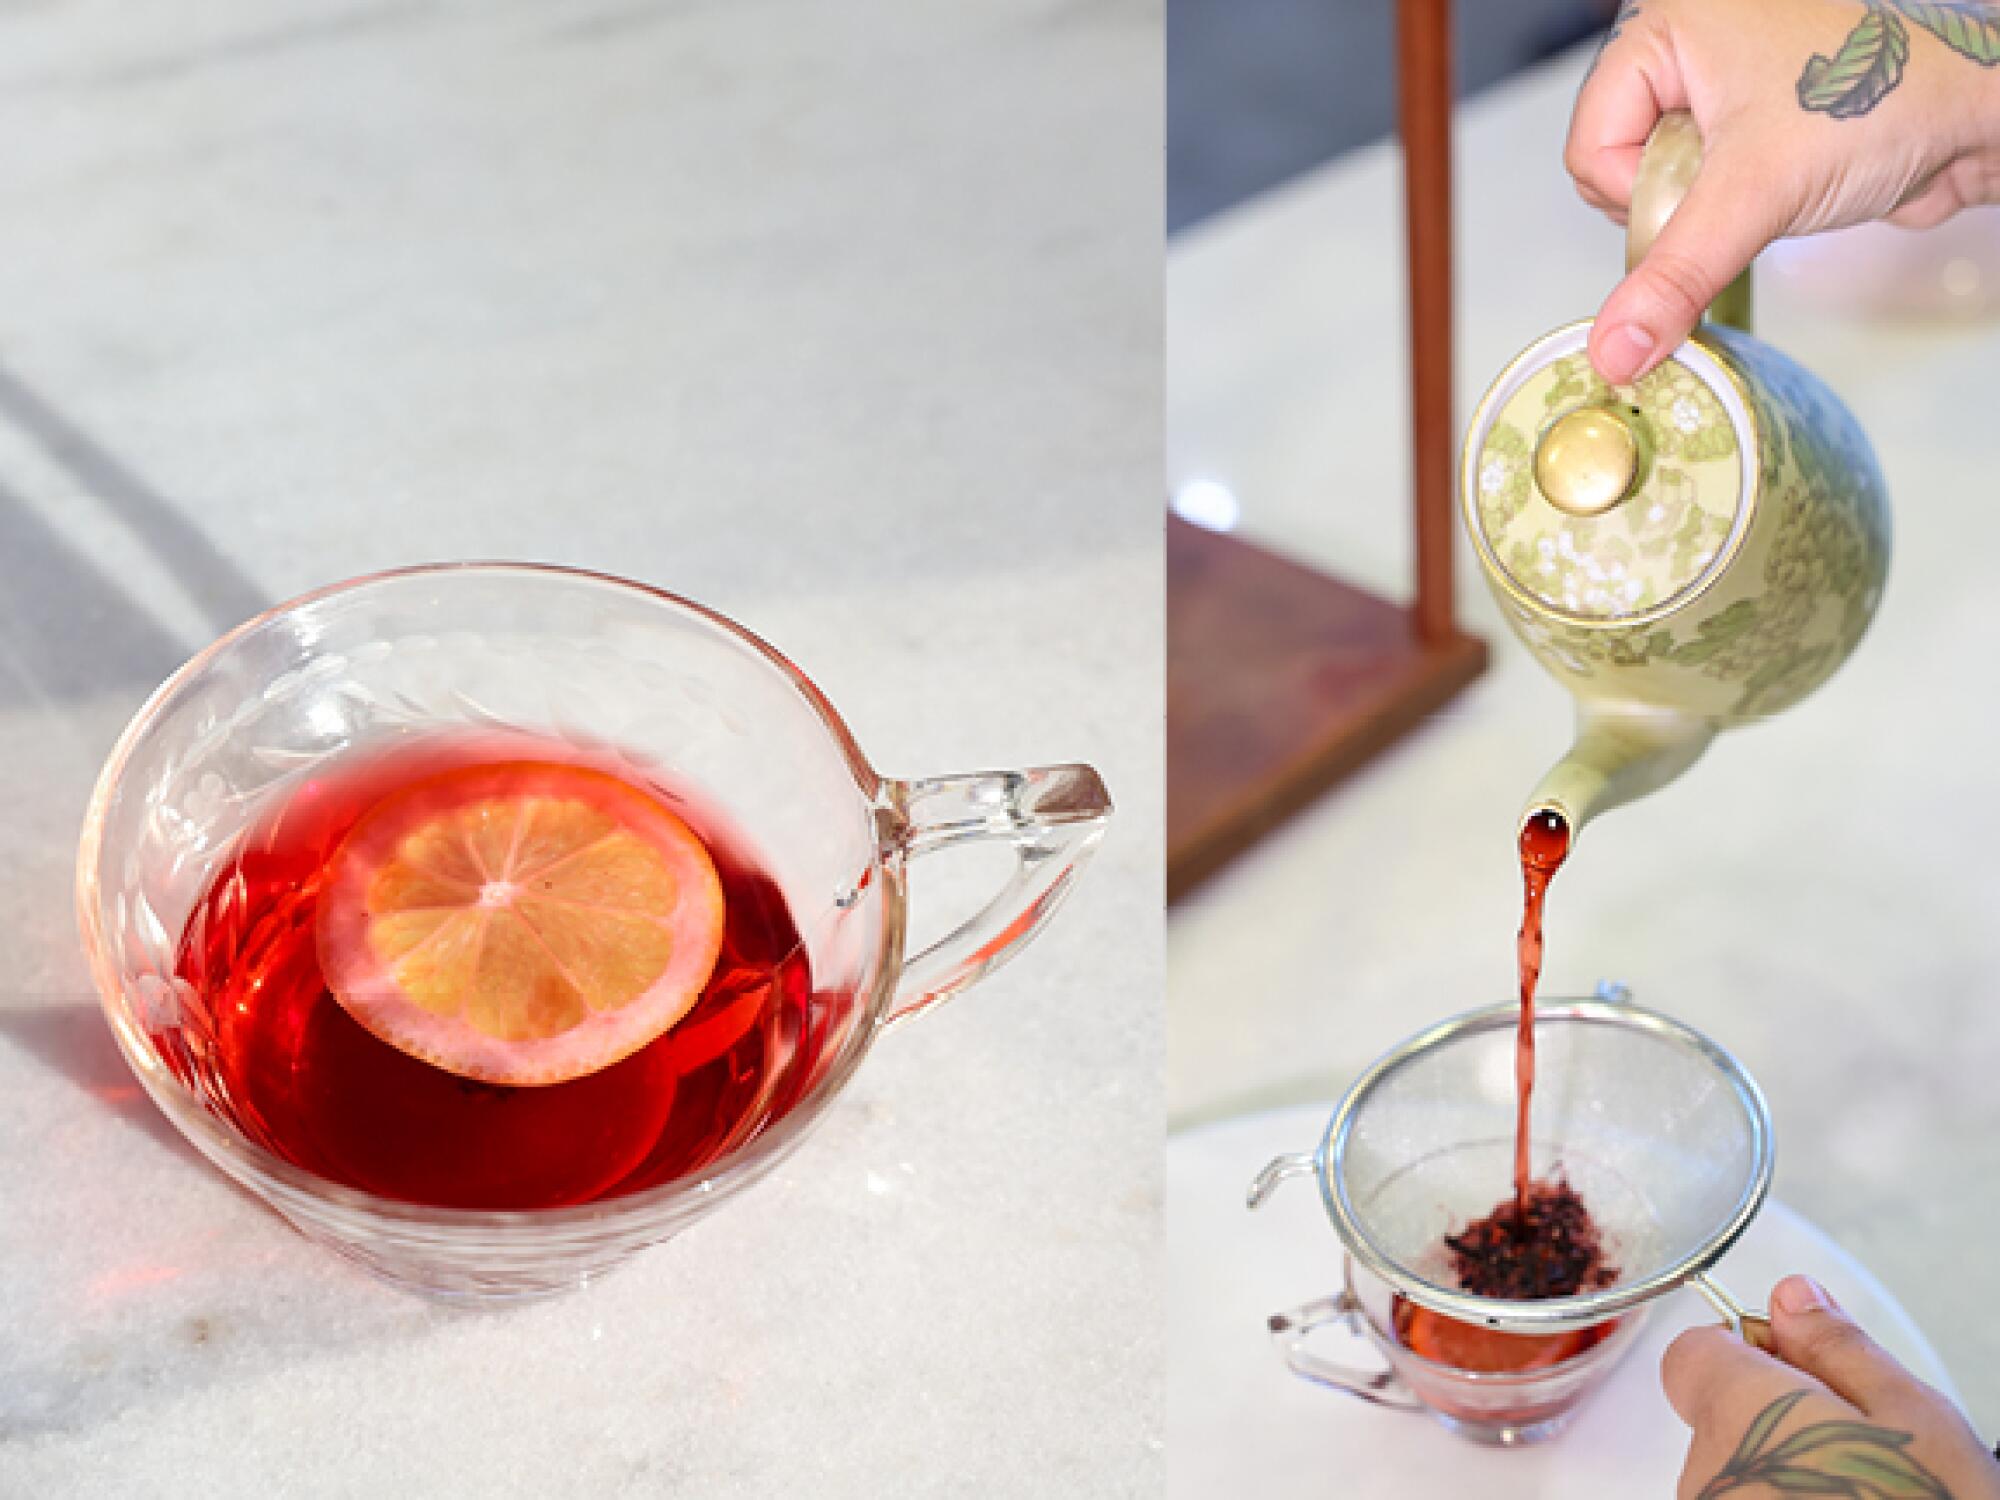 Reddish tea in a glass teacup, left; a hand holds a teapot and pours out reddish tea over a strainer into a cup.